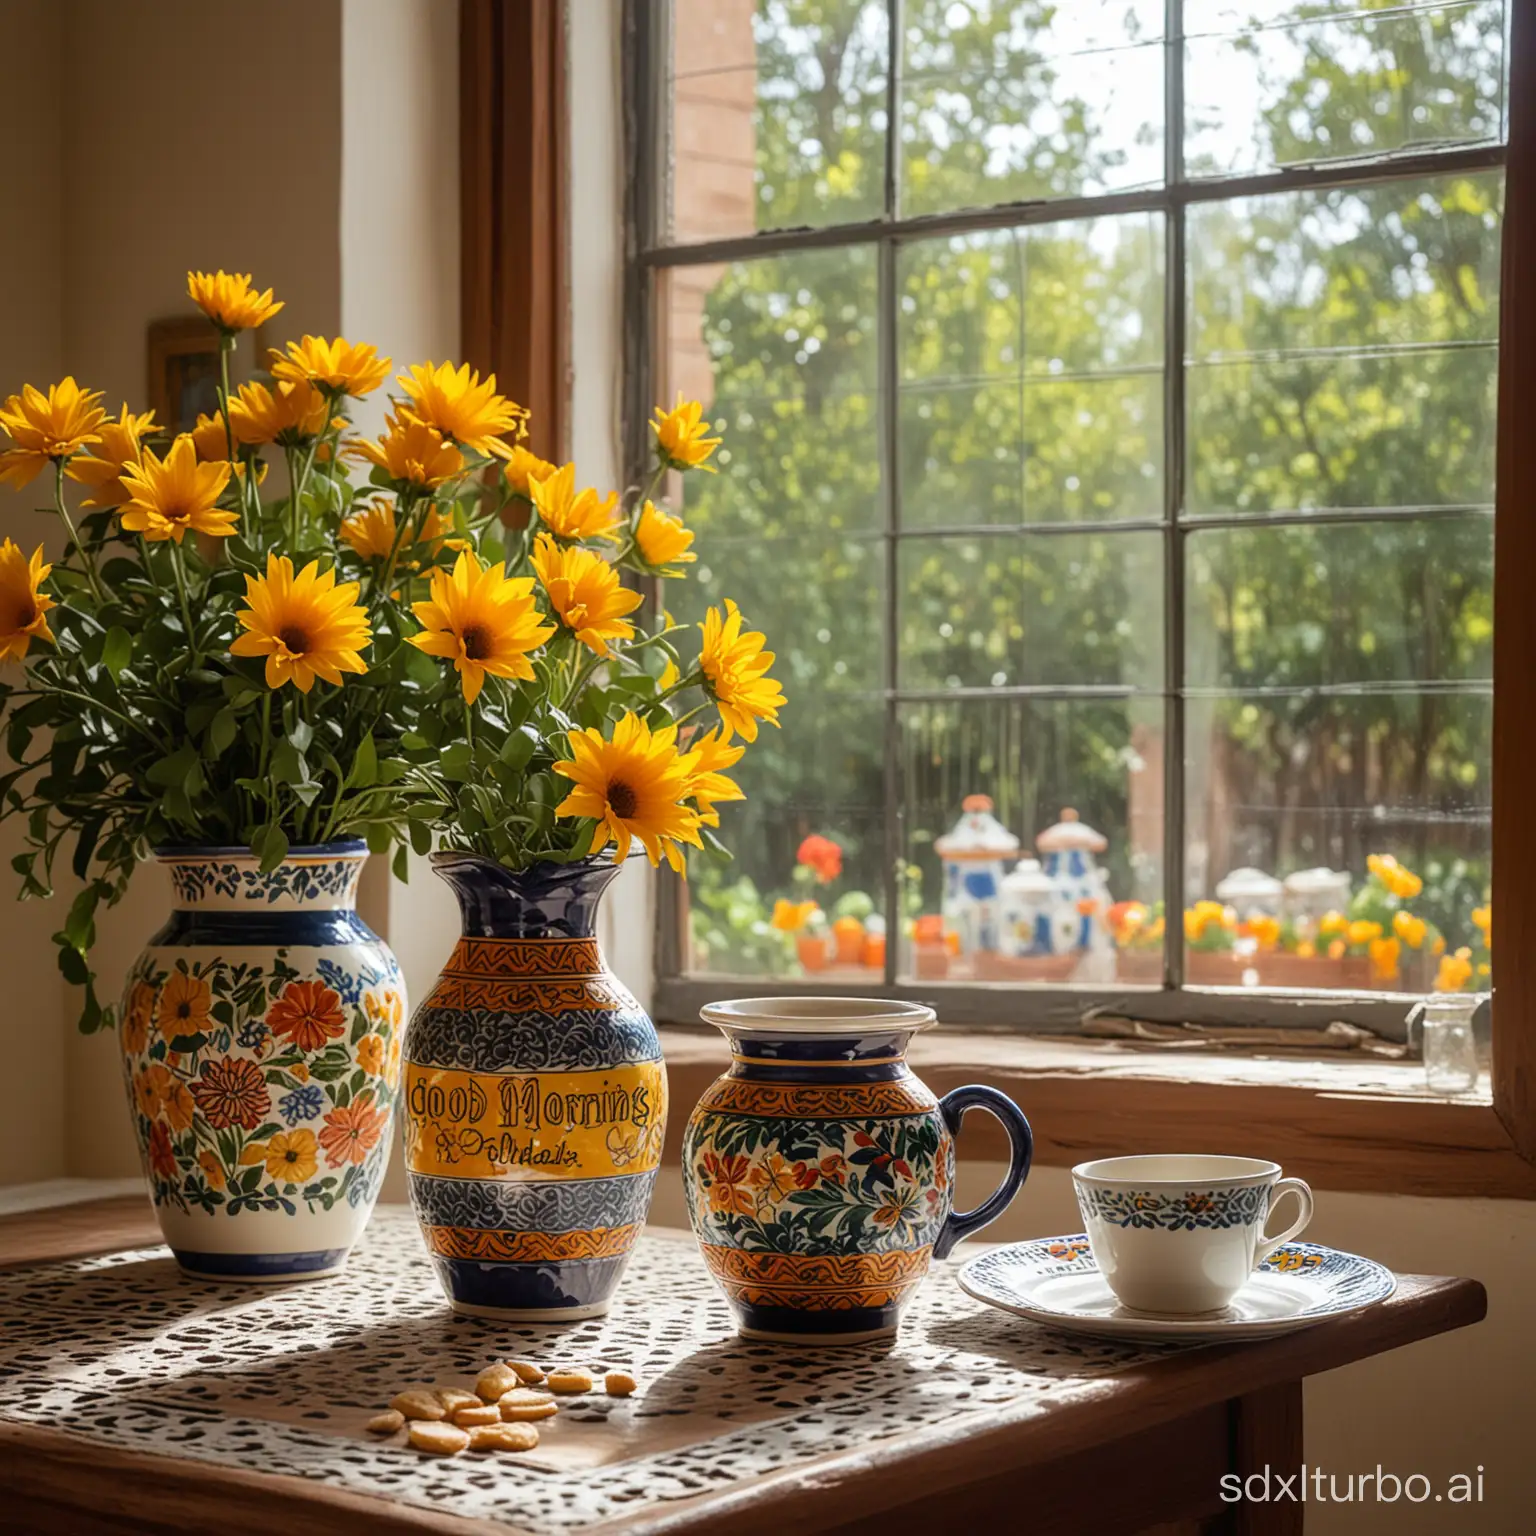 A beautiful talavera vase on a table near a window of a Mexican hacienda, through which the sun's rays enter and a jar of delicious coffee with the text "Good morning Doradas".